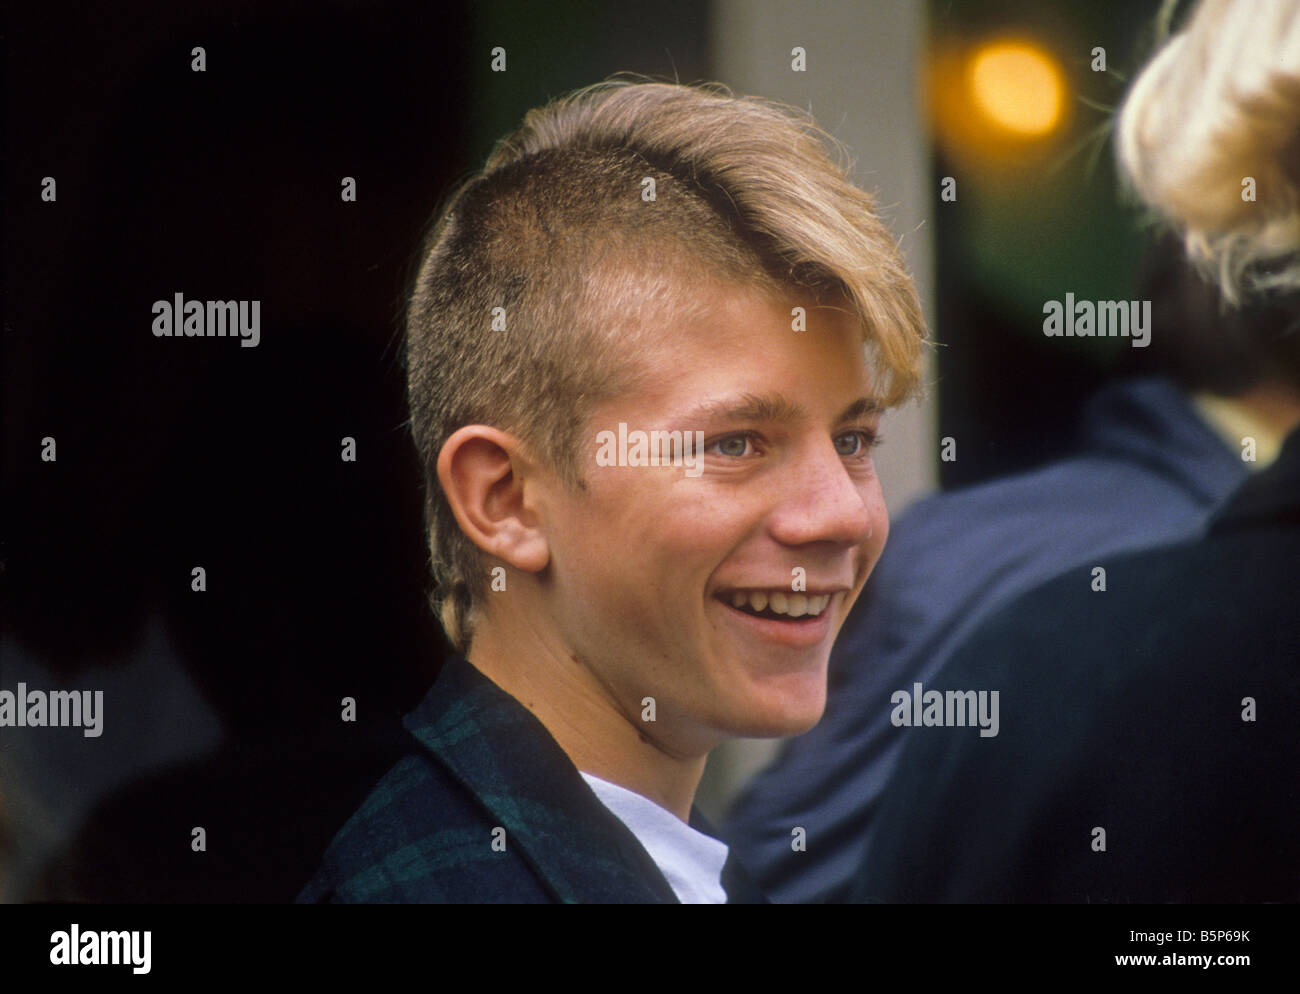 Outdoor portrait of teen boy with unusual haircut Stock Photo